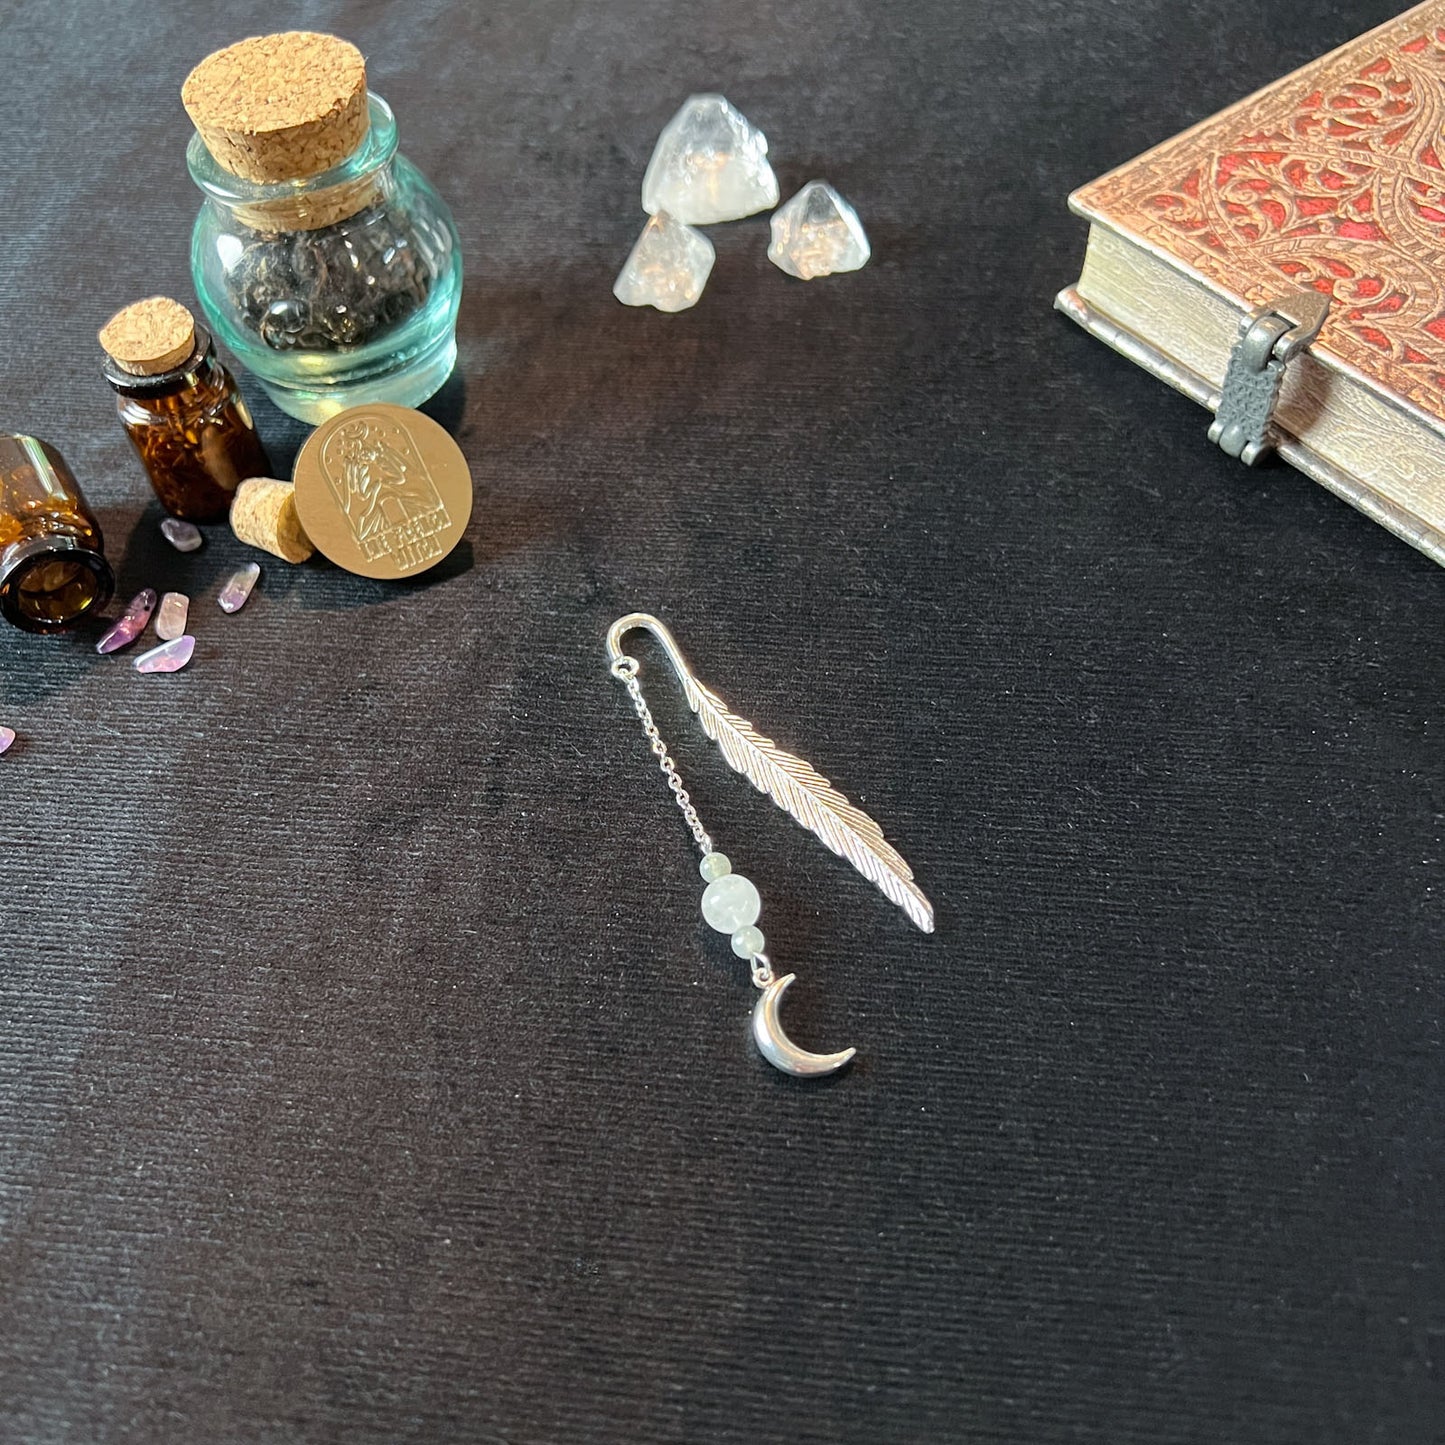 Small bookmark for your grimoire, book, journal, with gemstones and charms Baguette Magick